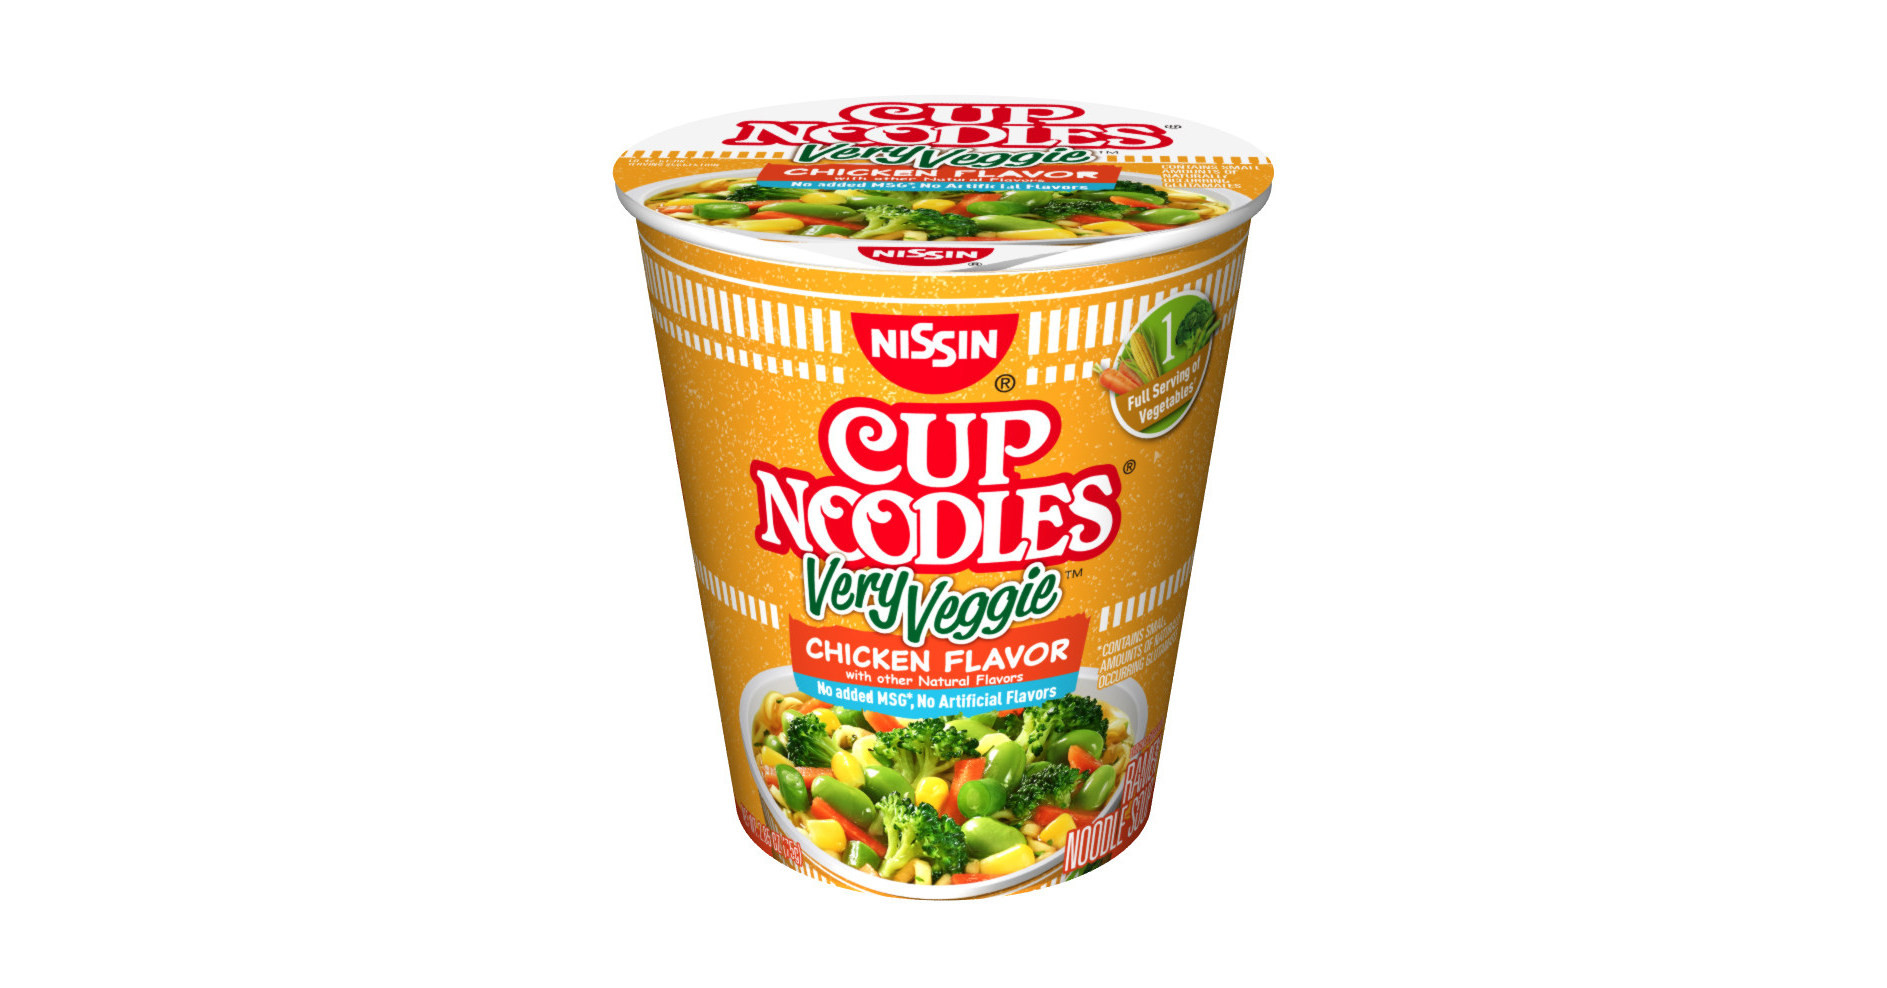 Cup Noodles Very Veggie
 Cup Noodles Announces Very Veggie™ Launch The First